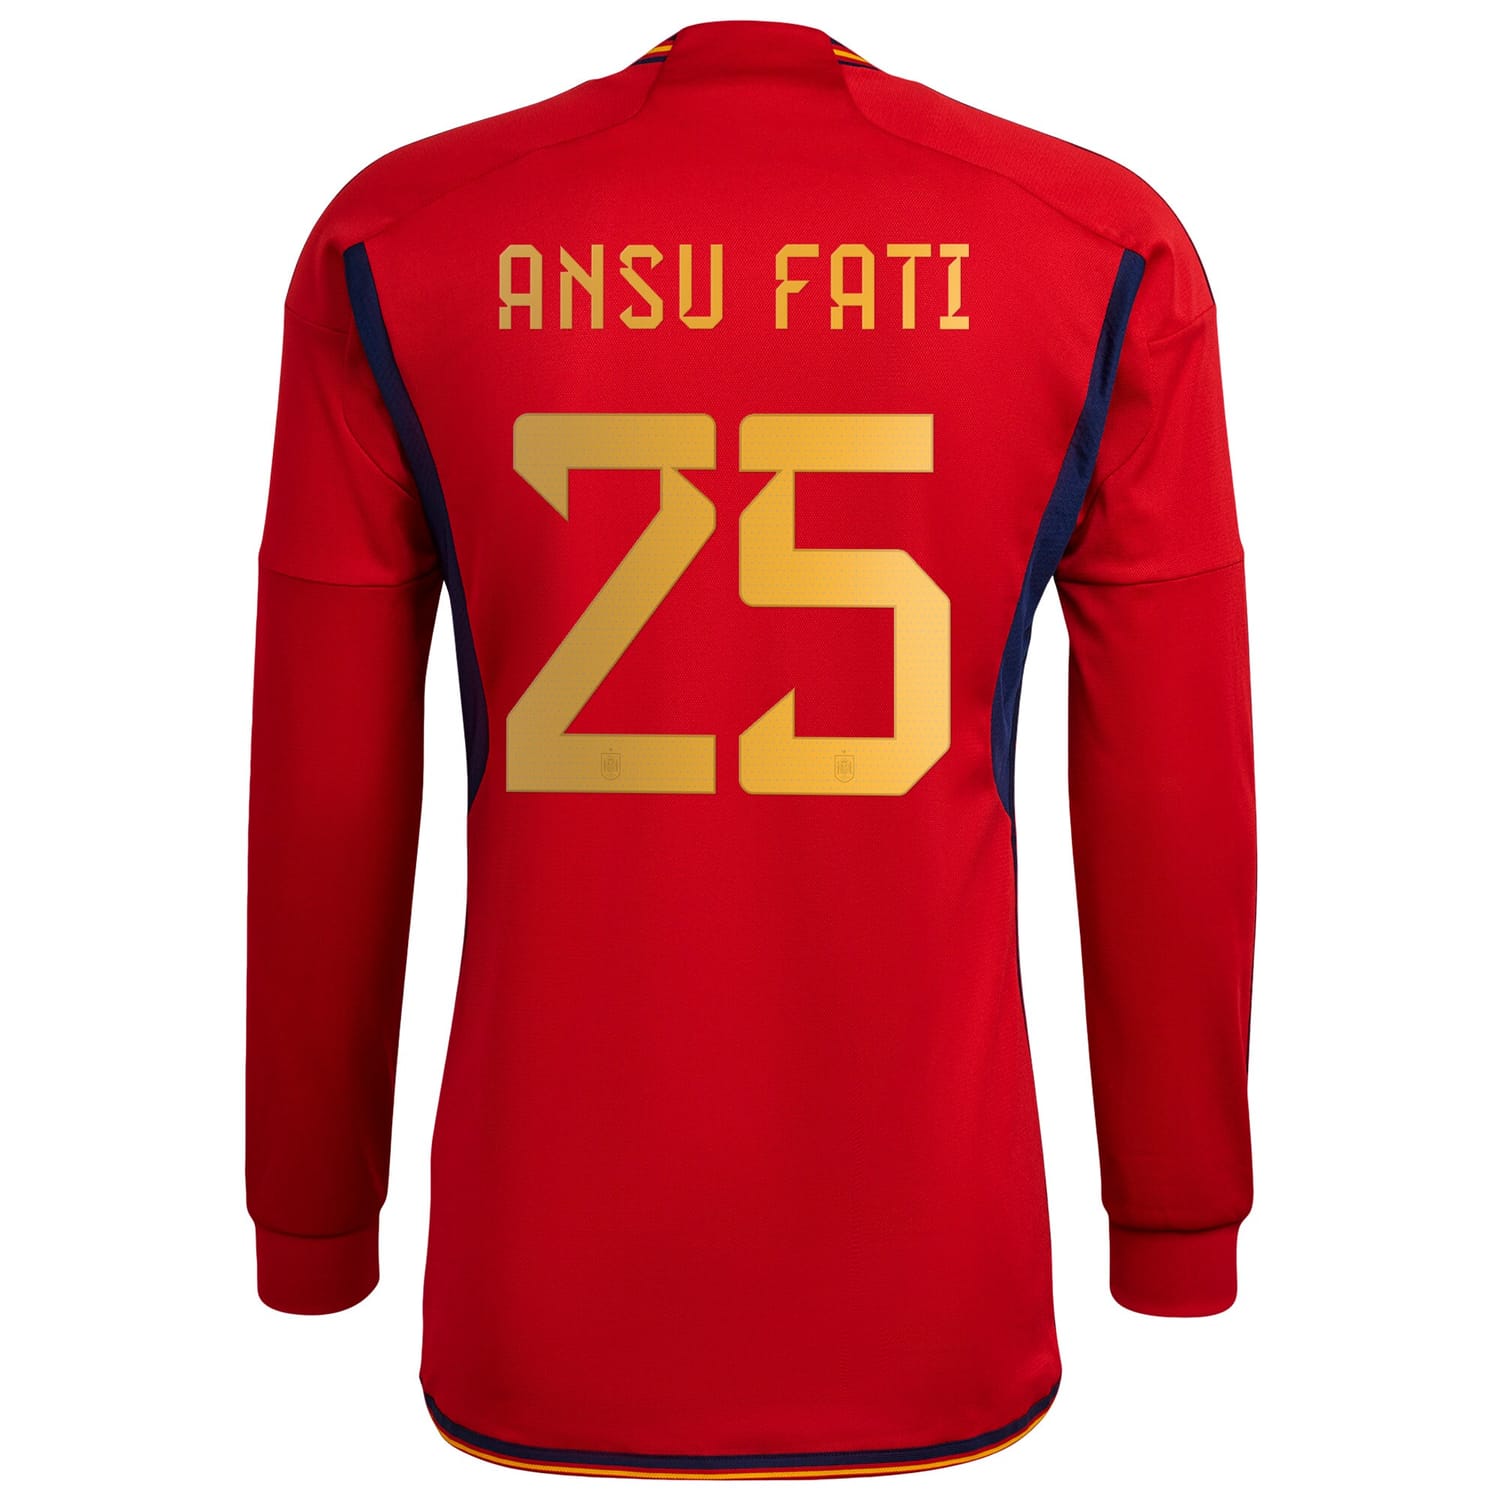 Spain National Team Home Jersey Shirt Long Sleeve Red 2022-23 player Ansu Fati printing for Men